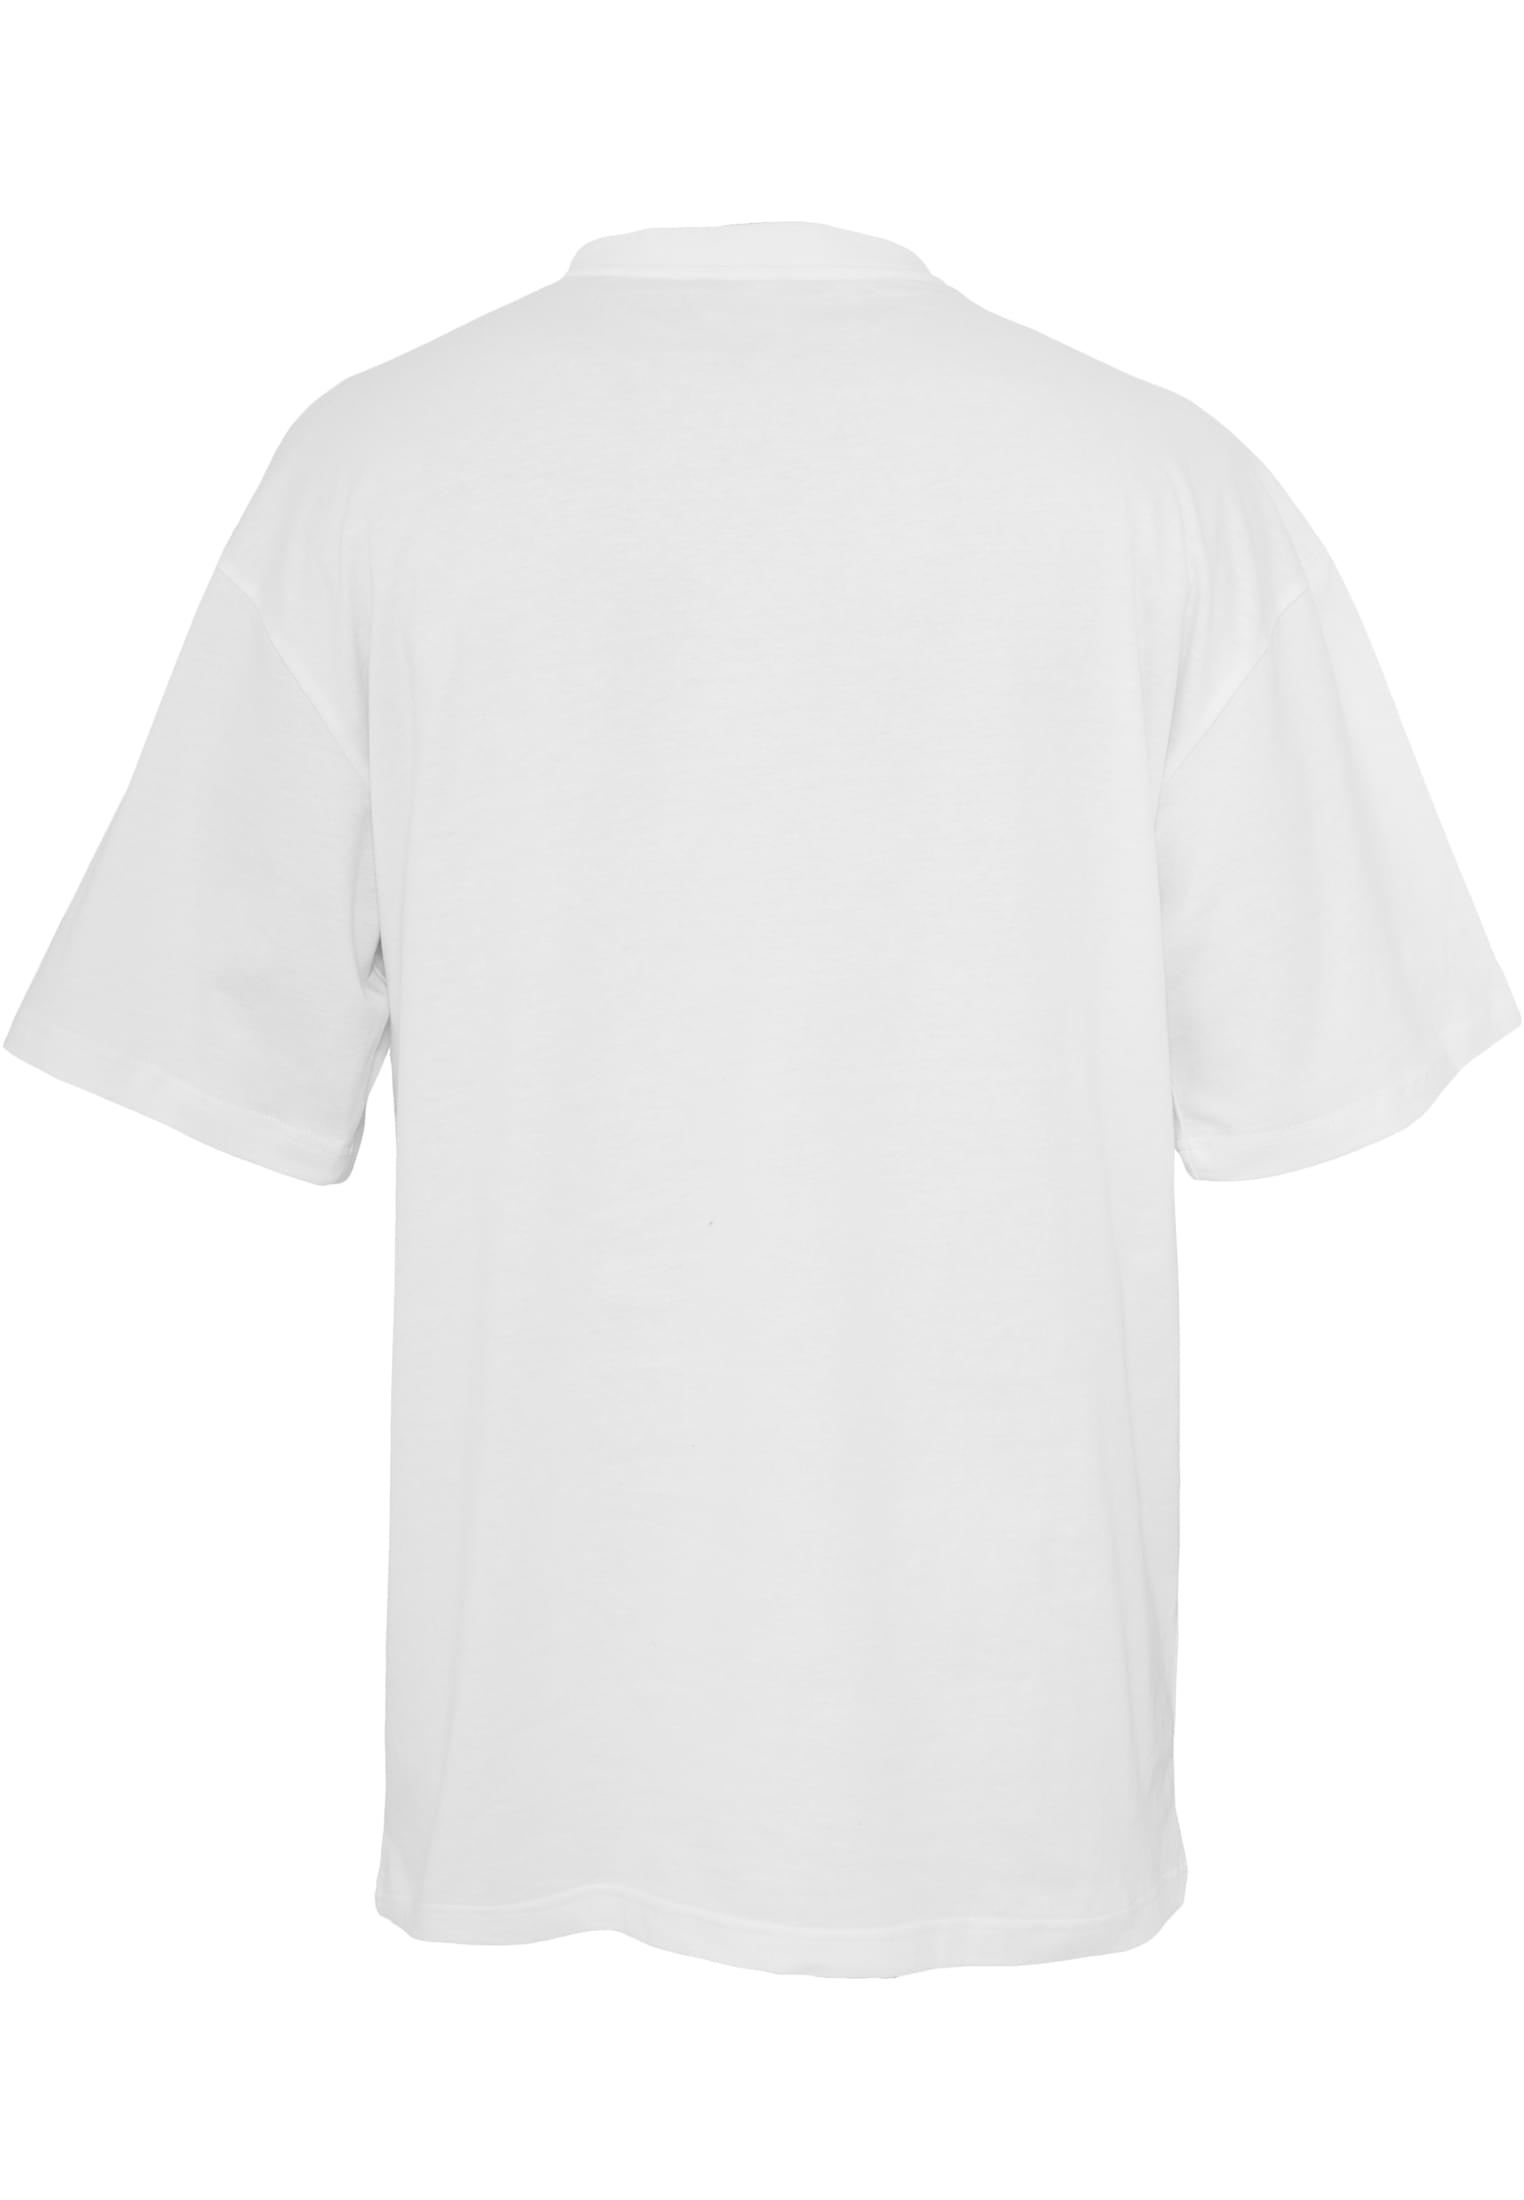 Plus Size Tall Tee in Farbe white